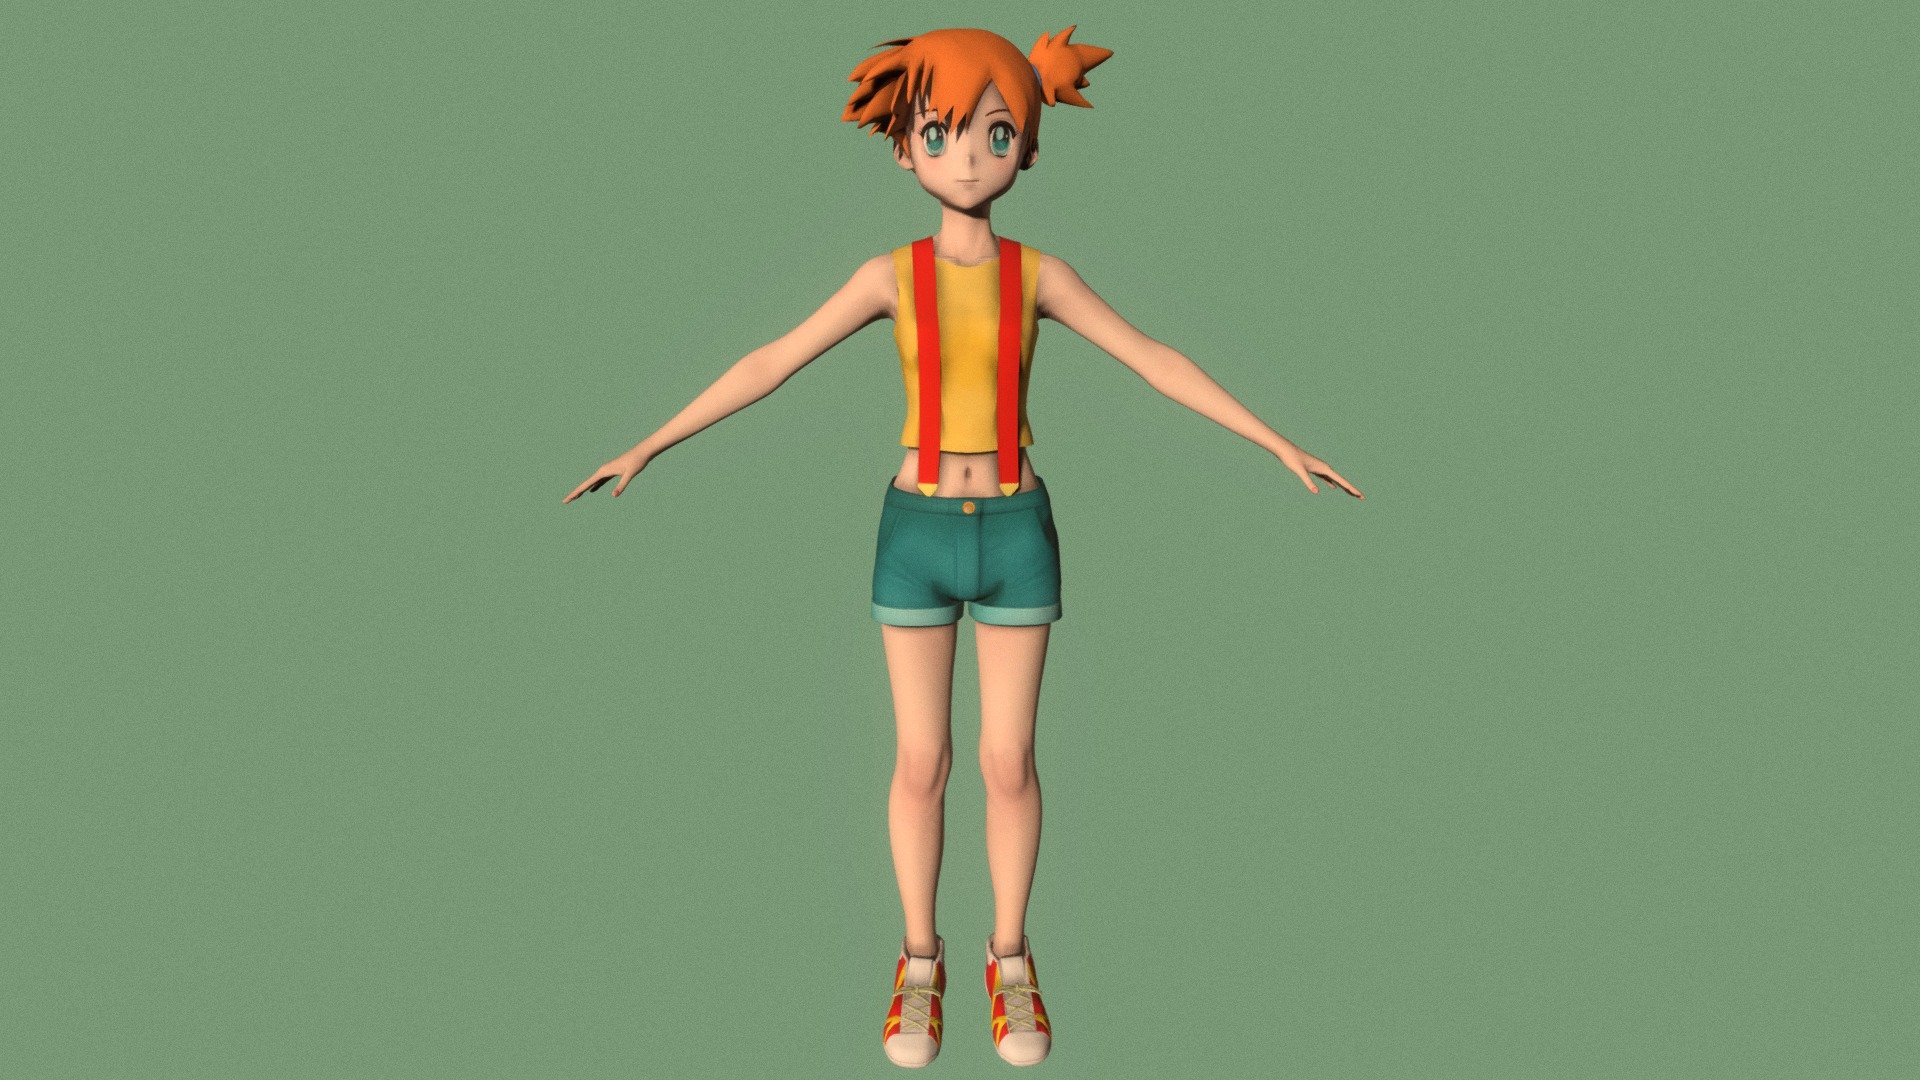 T-pose rigged model of anime girl Misty (Pokemon).

Body and clothings are rigged and skinned by 3ds Max CAT system.

Eye direction and facial animation controlled by Morpher modifier / Shape Keys / Blendshape.

This product include .FBX (ver. 7200) and .MAX (ver. 2010) files.

3ds Max version is turbosmoothed to give a high quality render (as you can see here).

Original main body mesh have ~7.000 polys.

This 3D model may need some tweaking to adapt the rig system to games engine and other platforms.

I support convert model to various file formats (the rig data will be lost in this process): 3DS; AI; ASE; DAE; DWF; DWG; DXF; FLT; HTR; IGS; M3G; MQO; OBJ; SAT; STL; W3D; WRL; X.

You can buy all of my models in one pack to save cost: https://sketchfab.com/3d-models/all-of-my-anime-girls-c5a56156994e4193b9e8fa21a3b8360b

And I can make commission models.

If you have any questions, please leave a comment or contact me via my email 3d.eden.project@gmail.com 3d model